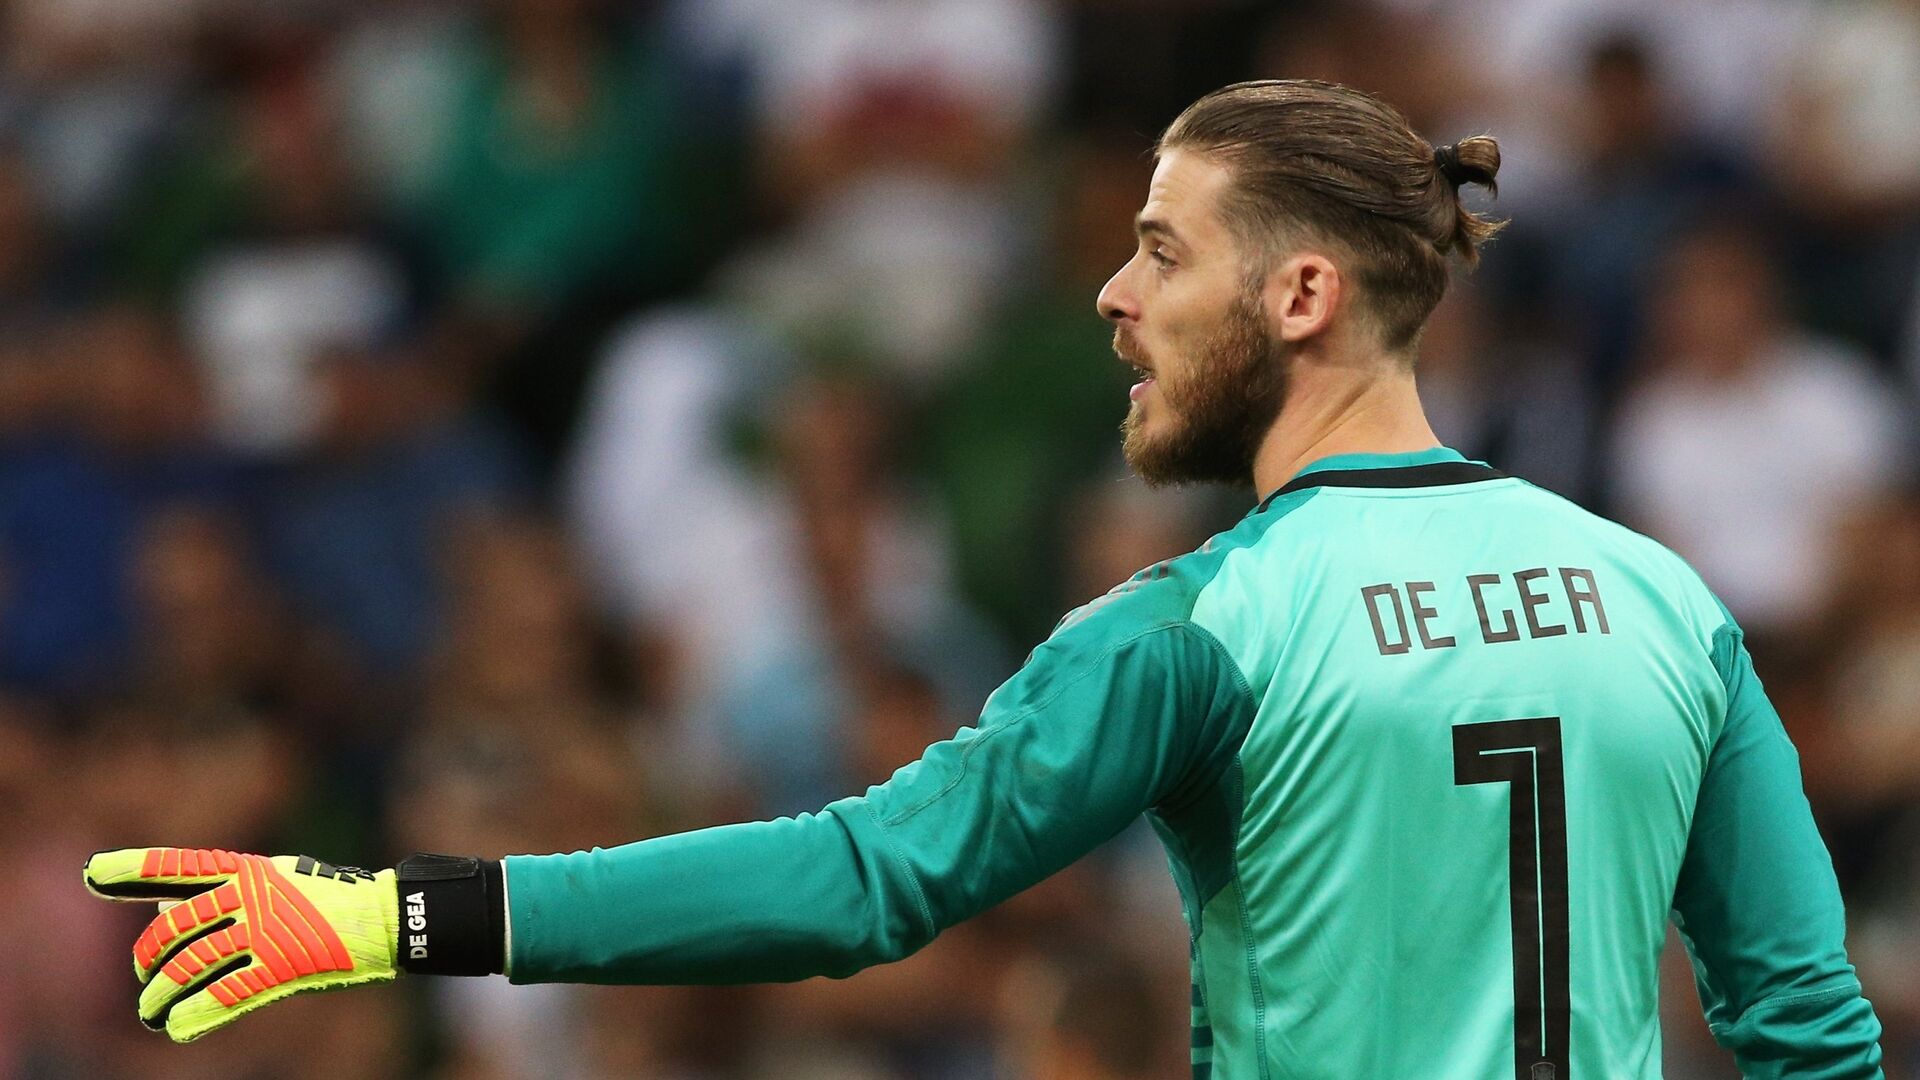 Spain's goalkeeper David de Gea points during a friendly match between Tunisia's and Spain's national soccer teams ahead of the World Cup in Krasnodar, Russia, June 9, 2018 - اسپوتنیک افغانستان  , 1920, 13.08.2022